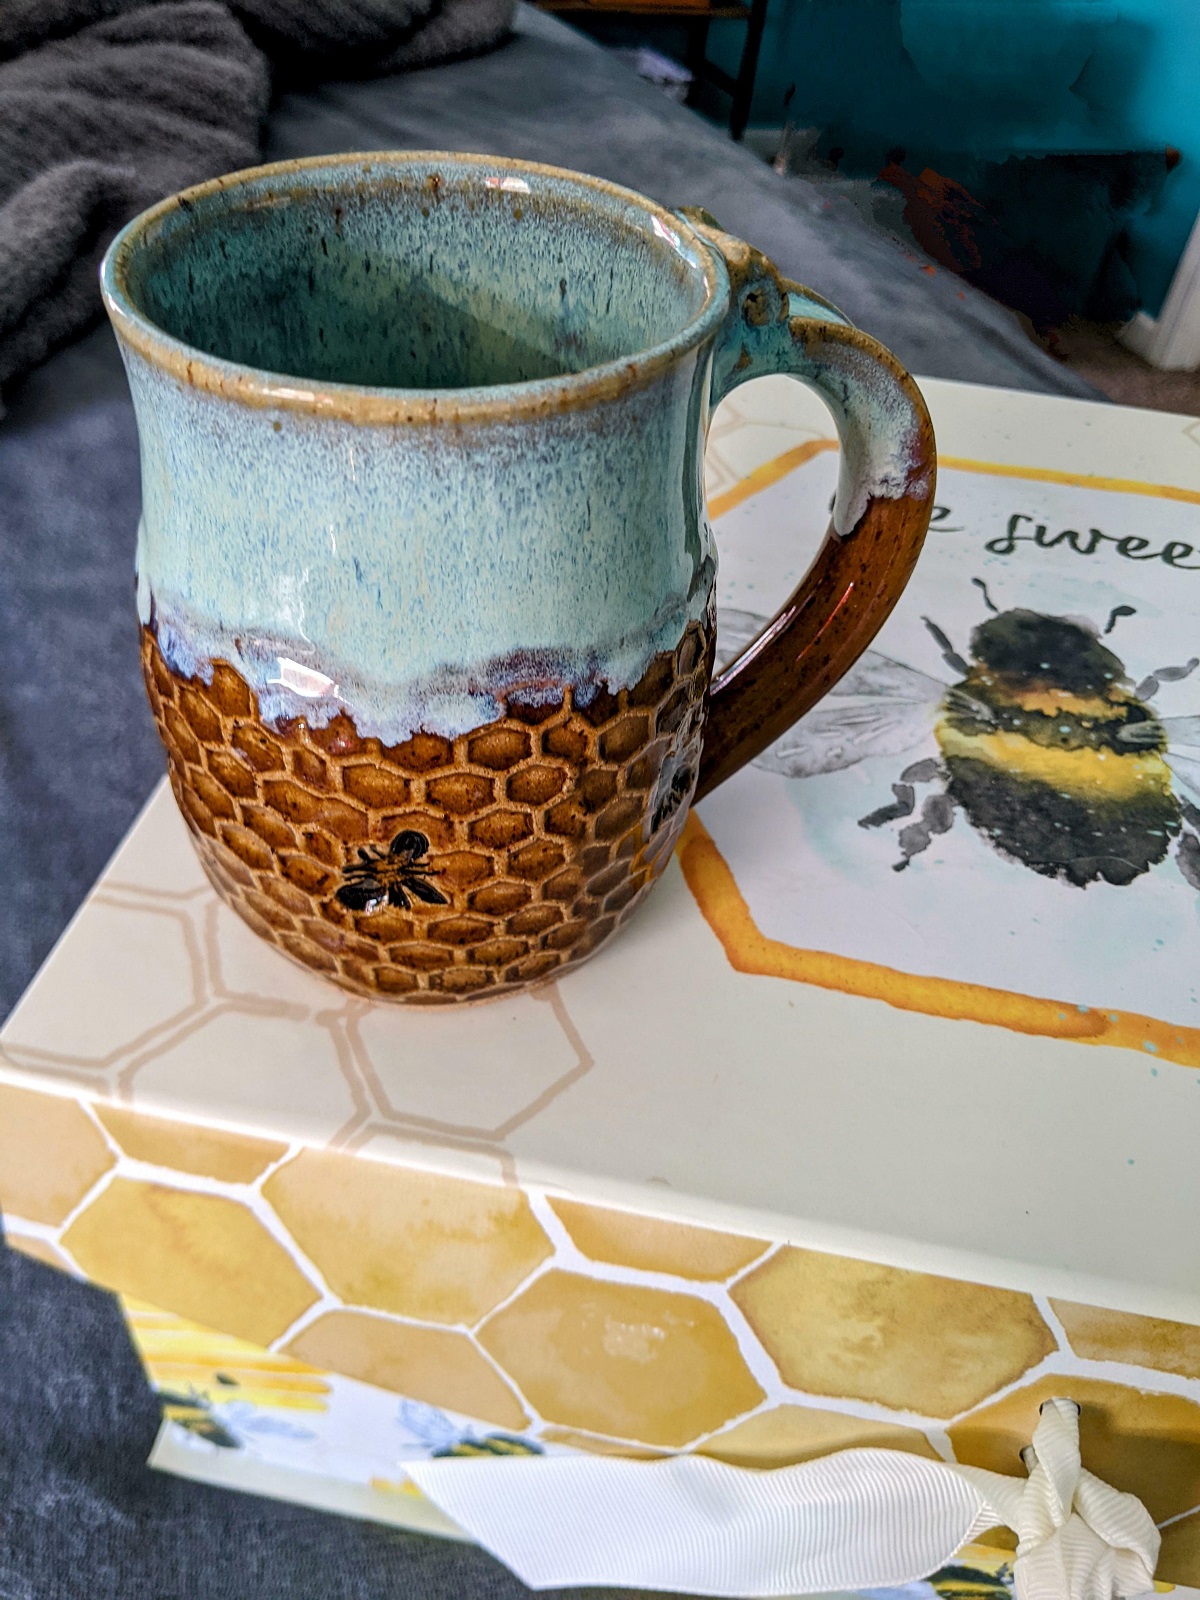 My New Mug From Etsy Is So Cute!